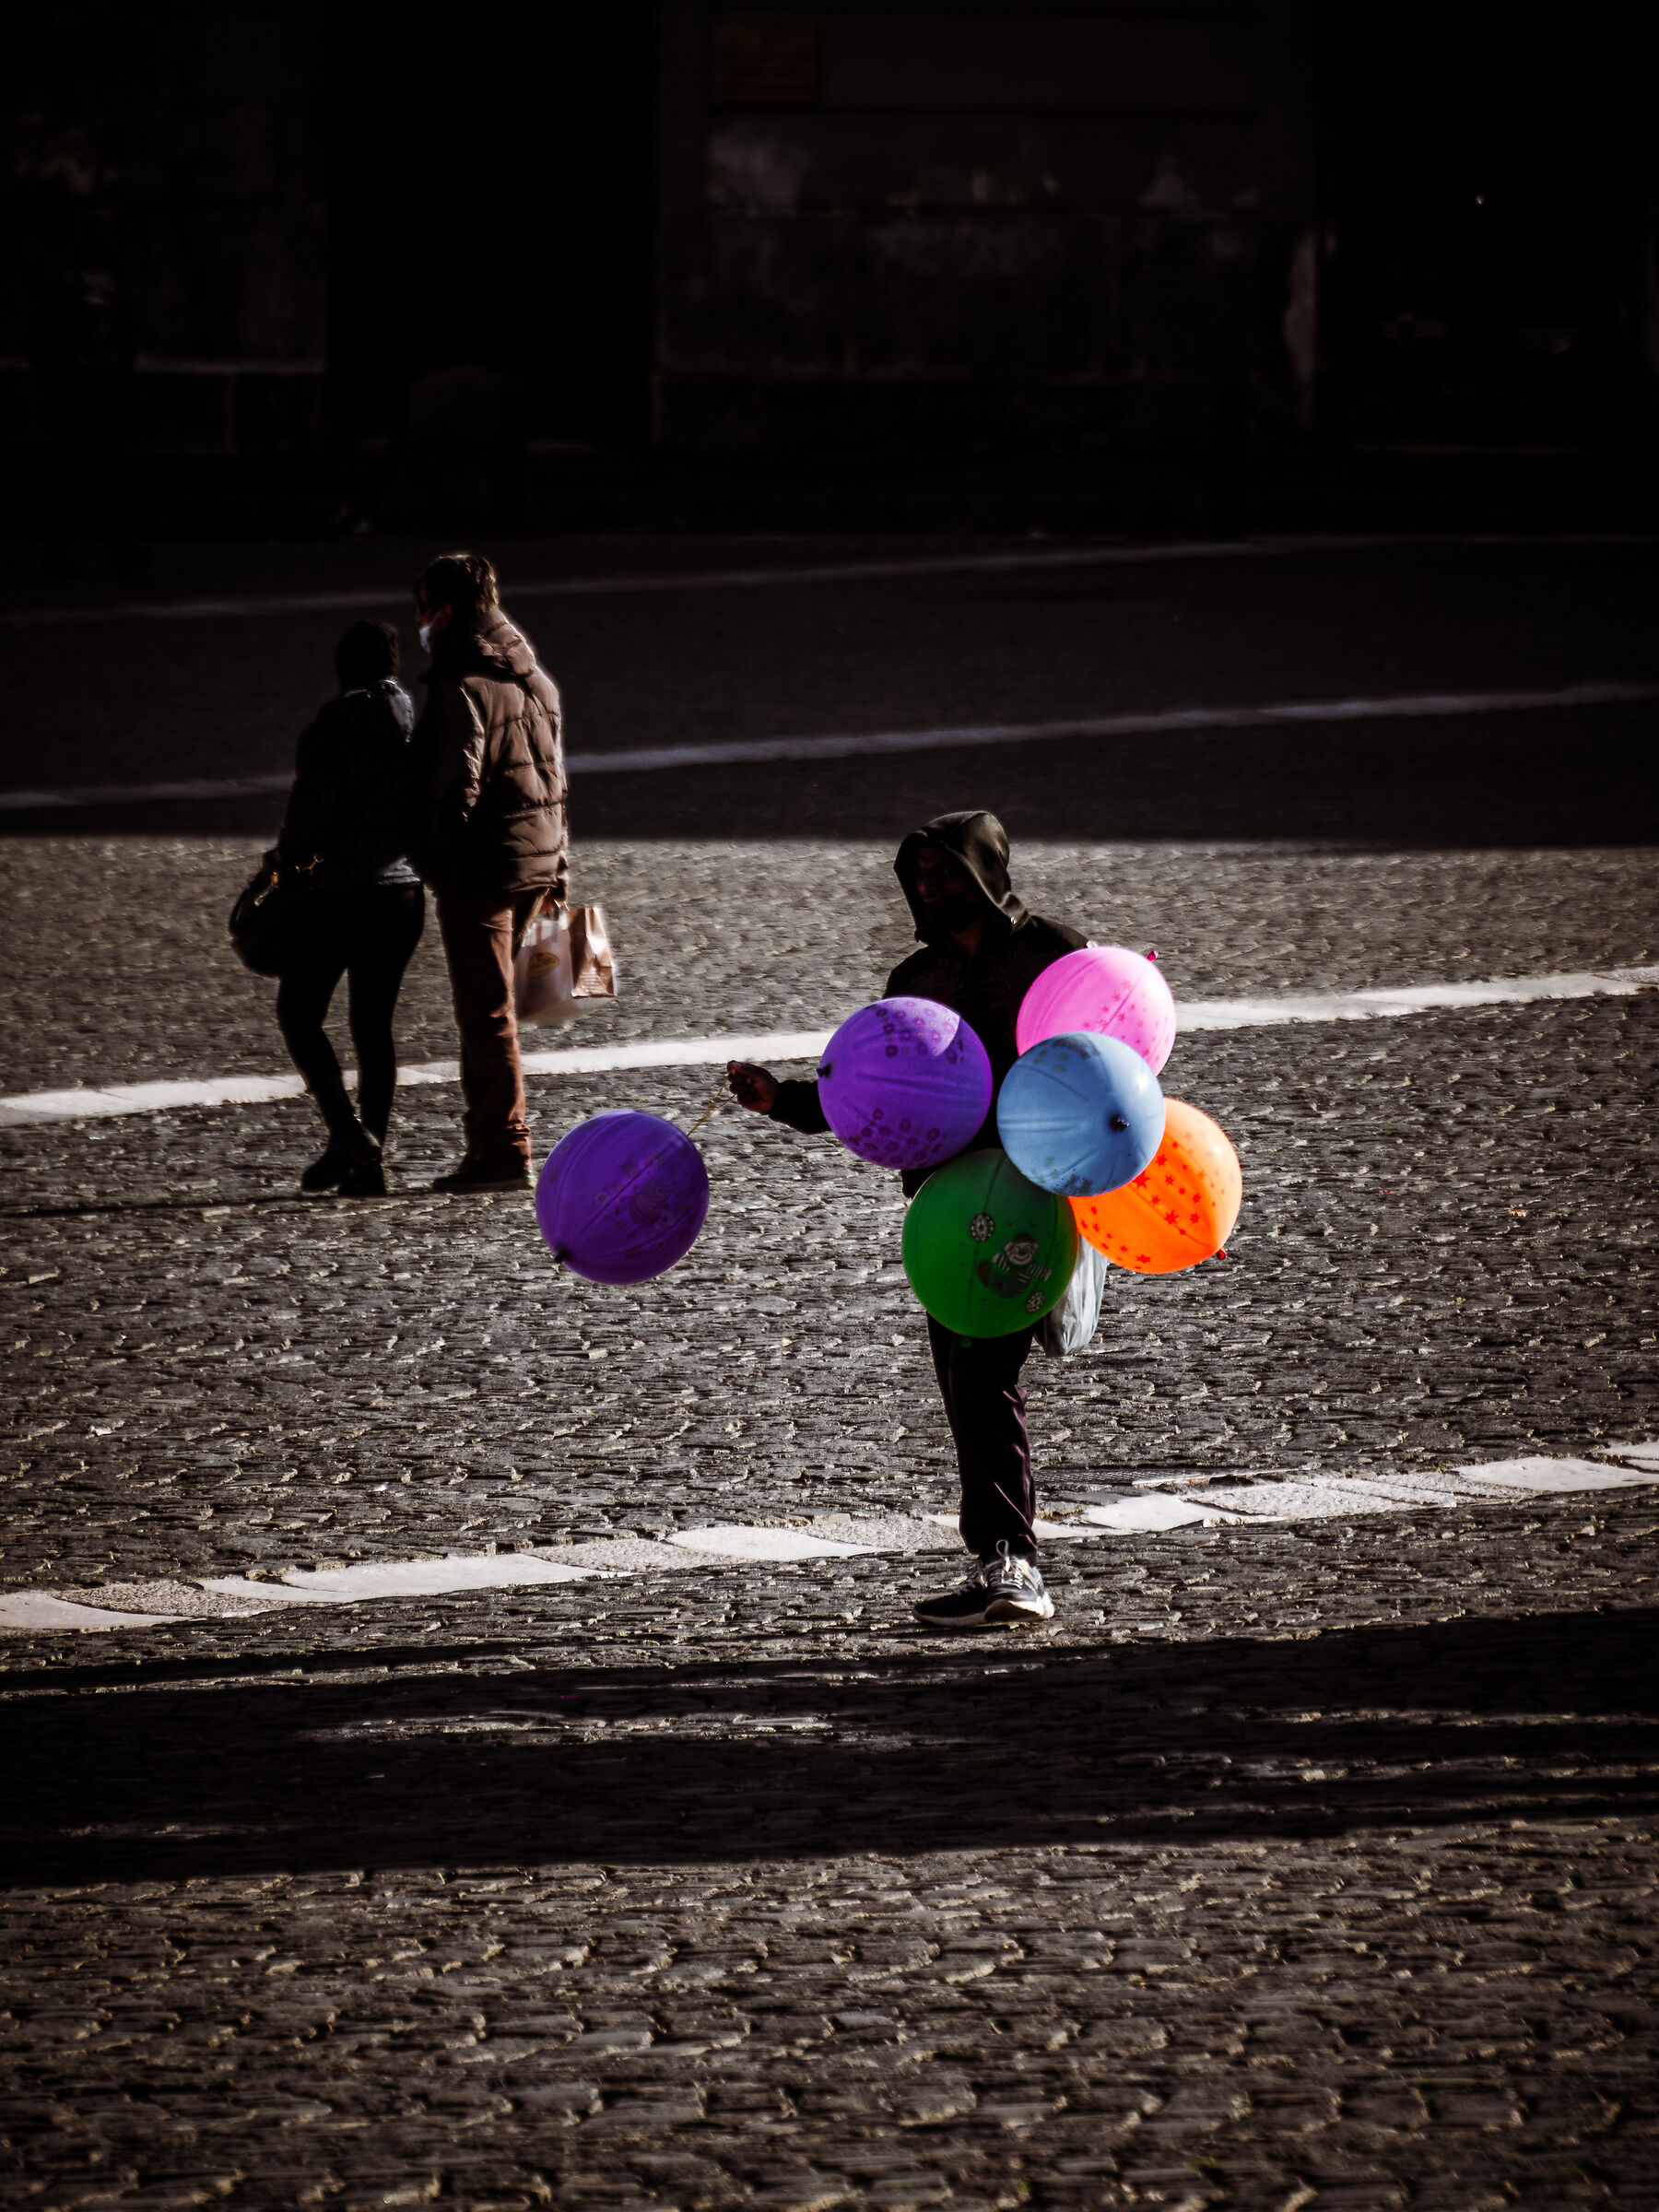 The seller of balloons...